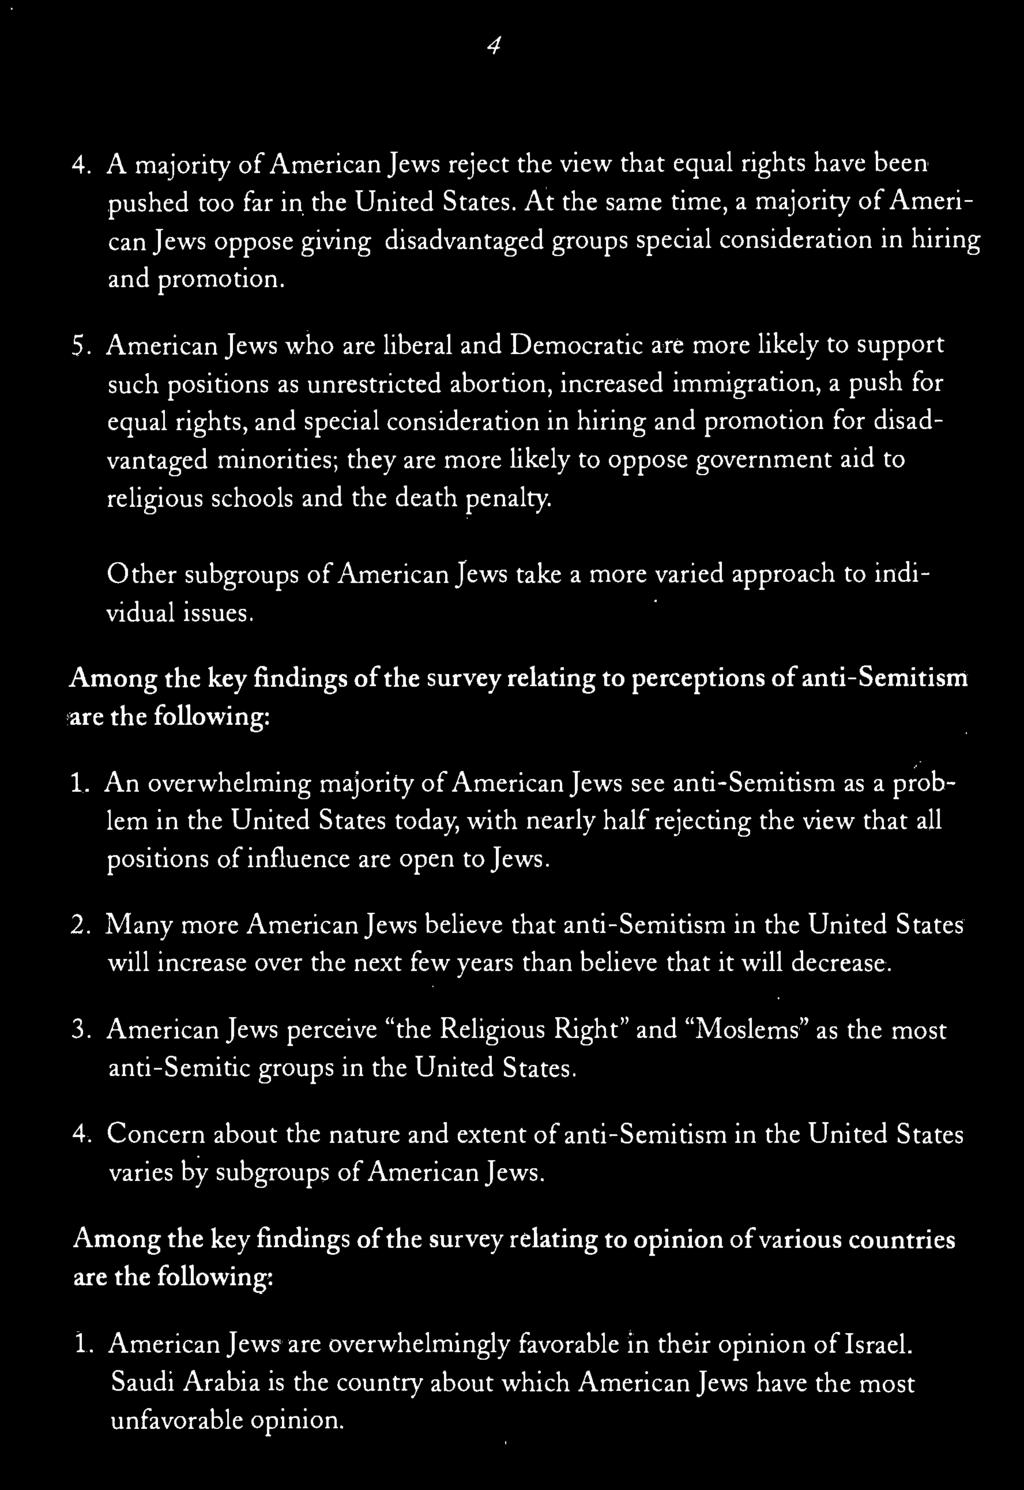 4 4. A majority of American Jews reject the view that equal rights have been pushed too far in the United States.